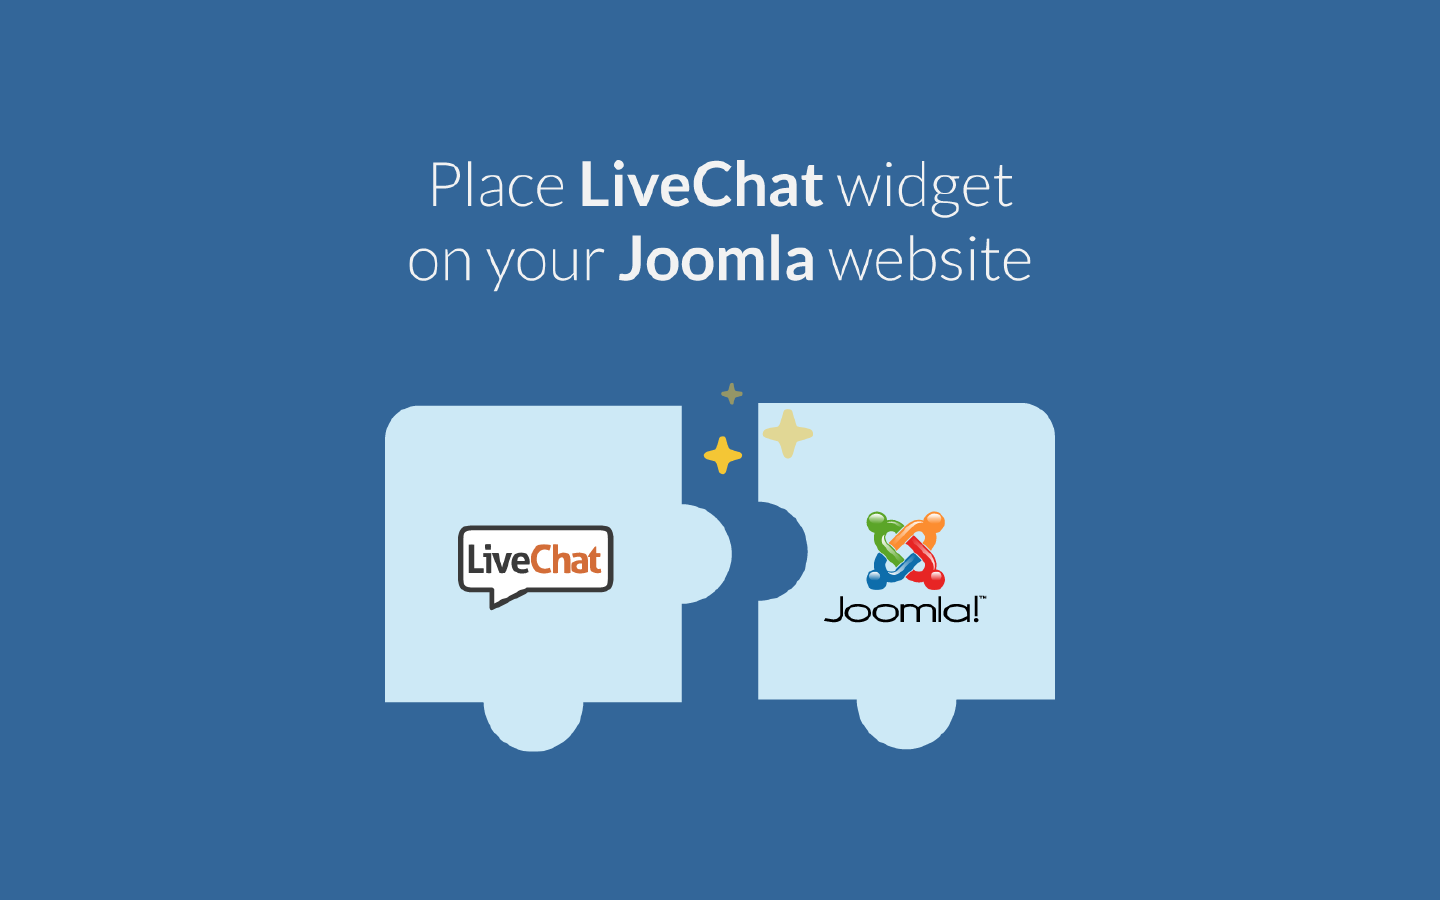 LiveChat integrates with Joomla